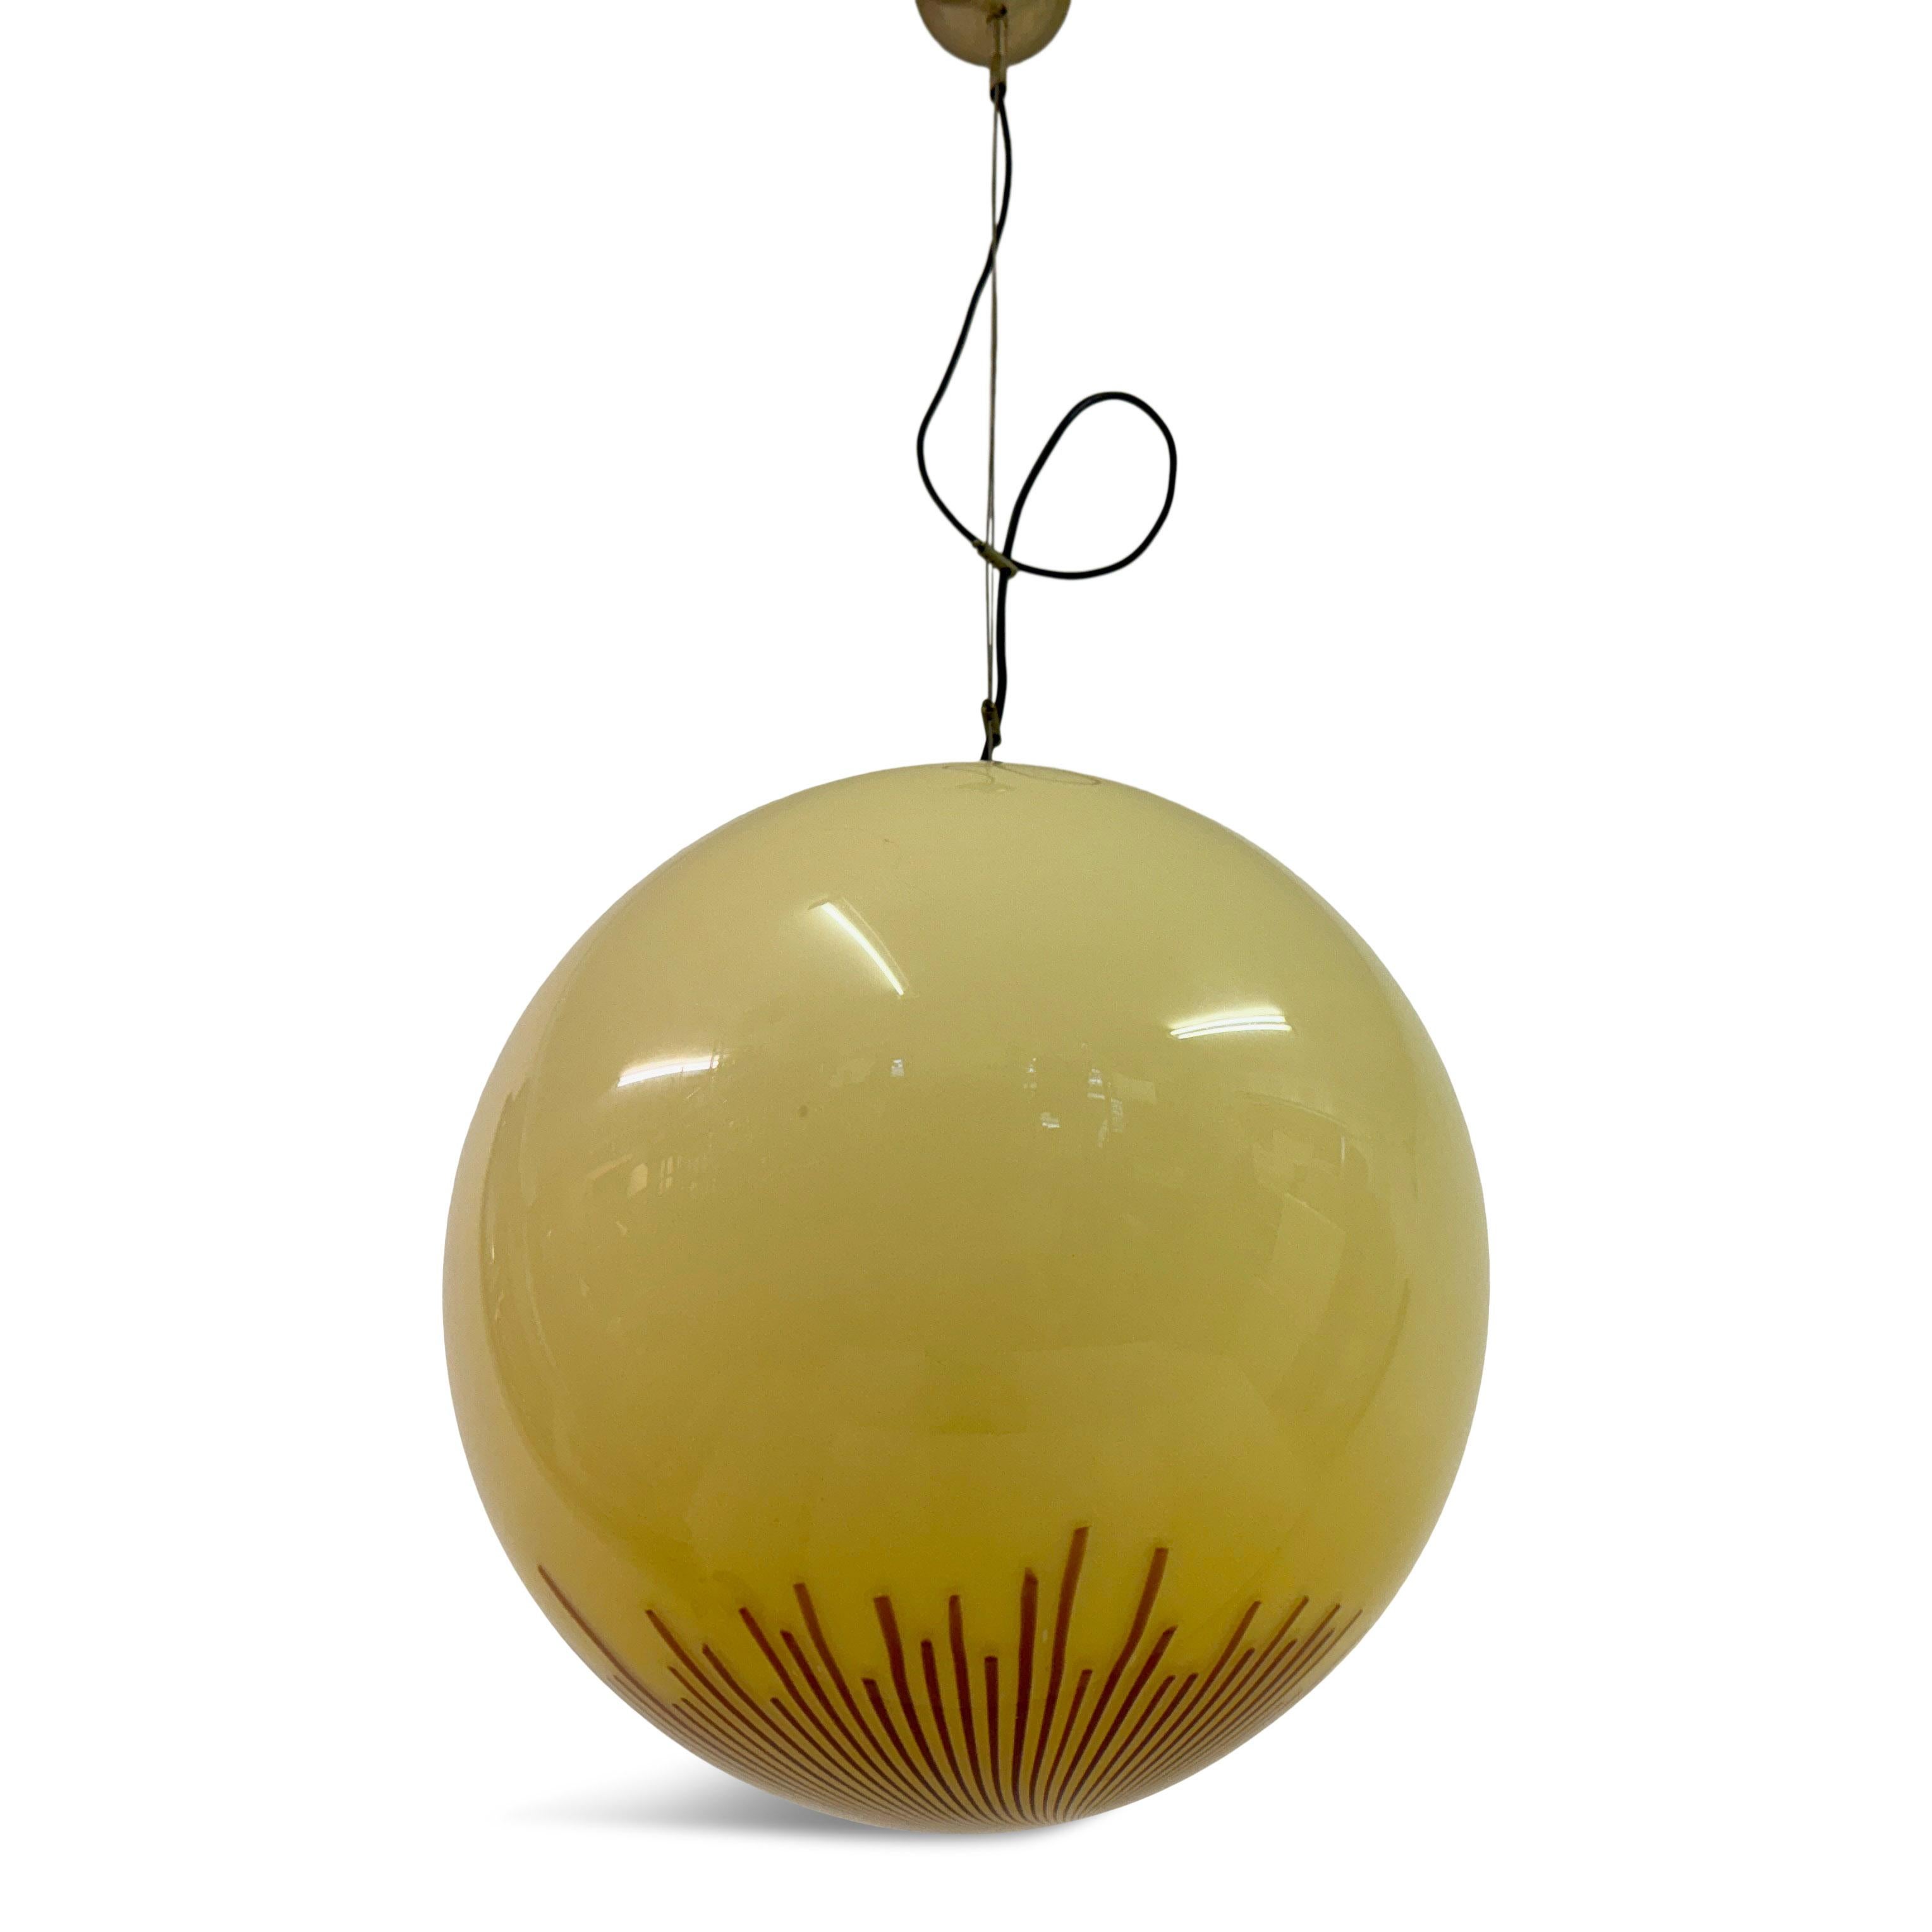 Sphere or ball pendant

by La Murrina

Anemone pattern

Murano glass

Can be height-adjusted

Italy 1970s
